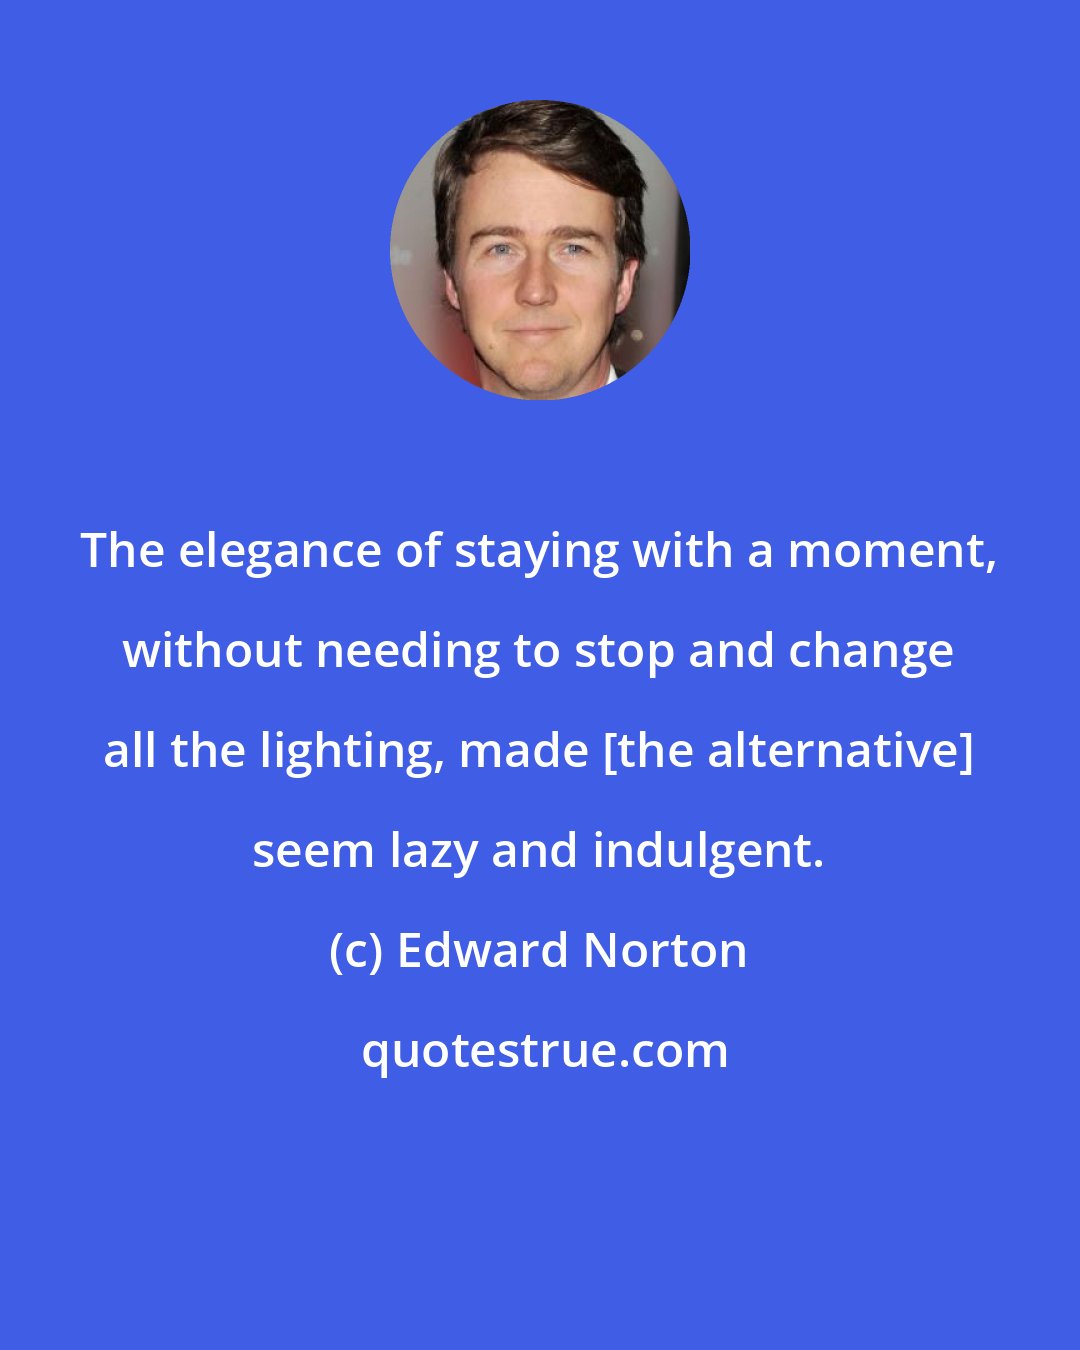 Edward Norton: The elegance of staying with a moment, without needing to stop and change all the lighting, made [the alternative] seem lazy and indulgent.